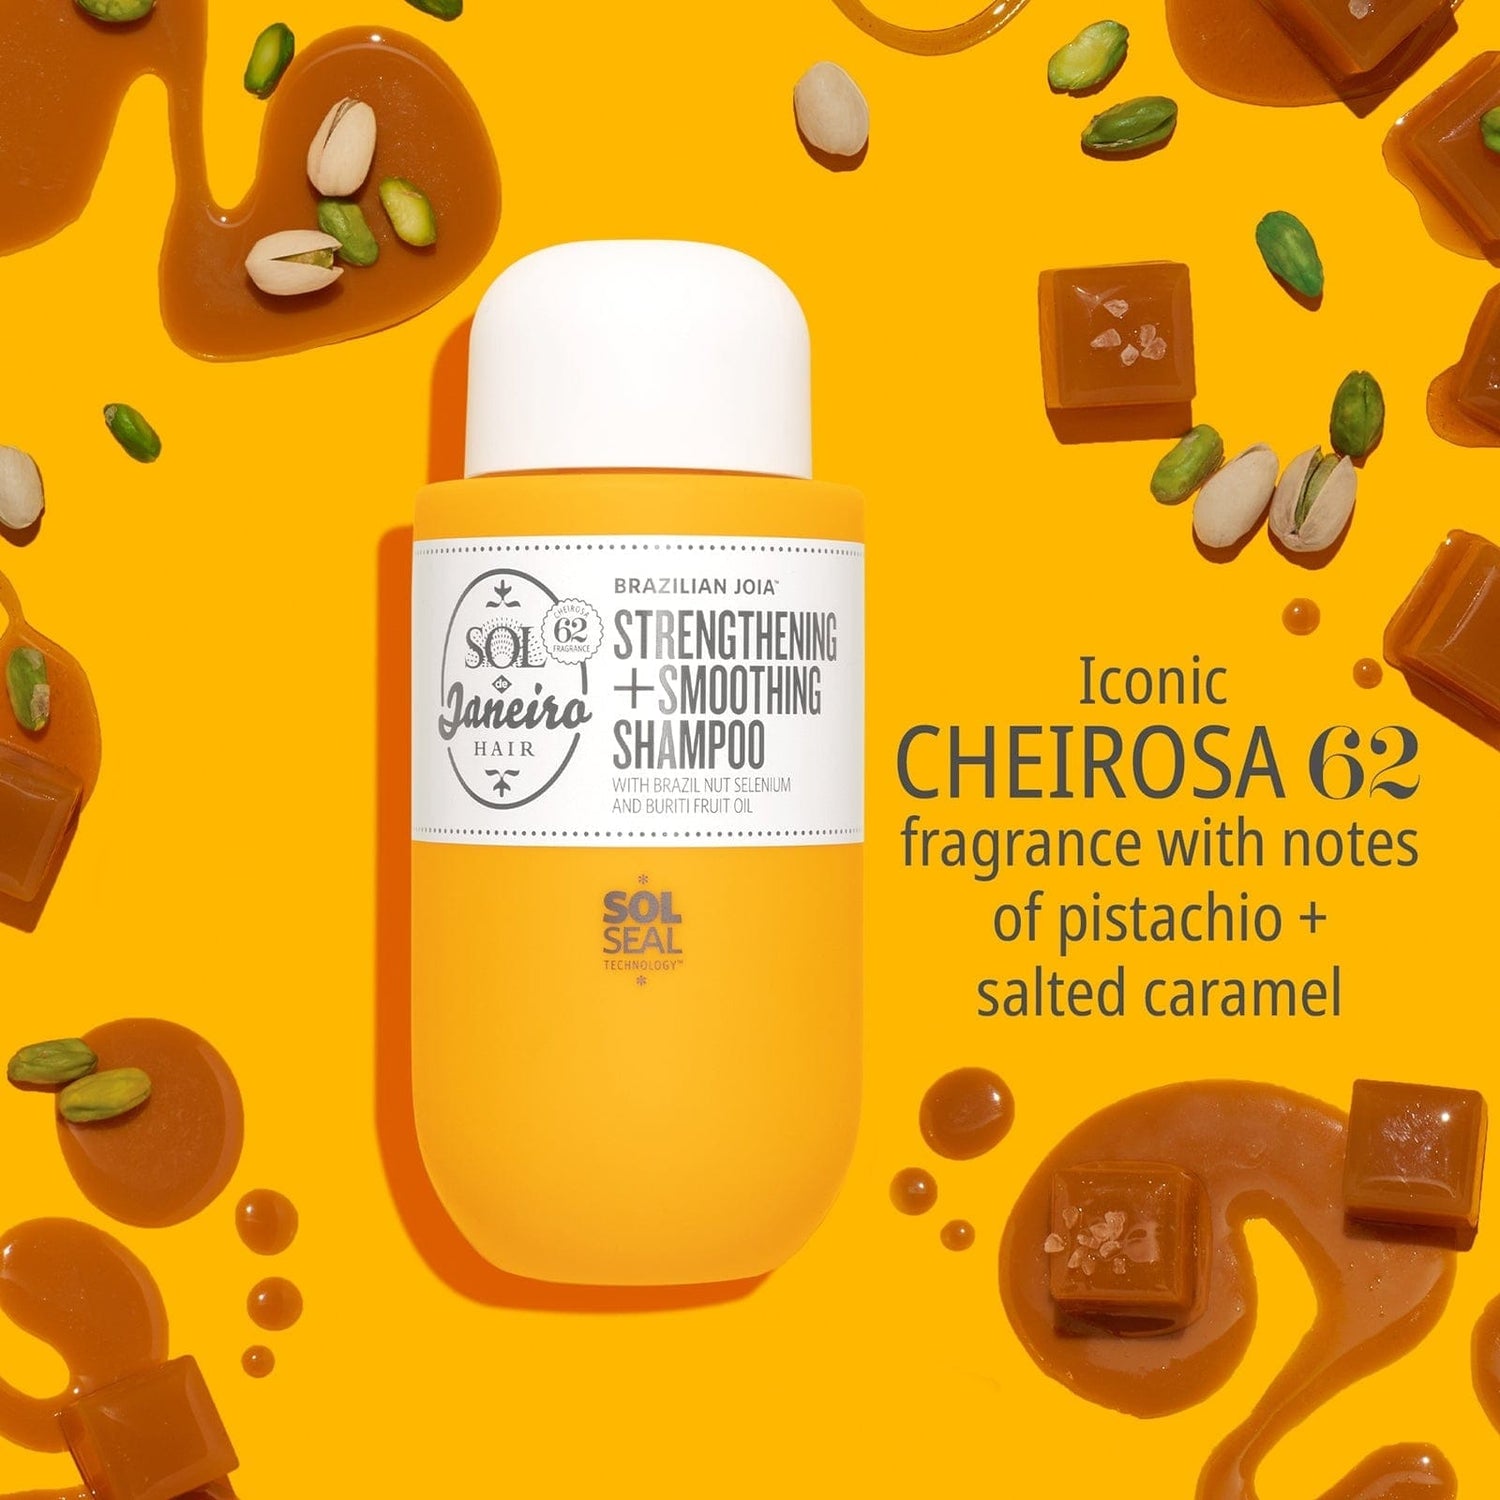 Iconic Cheirosa 62 fragrance notes of pistachio + salted caramel